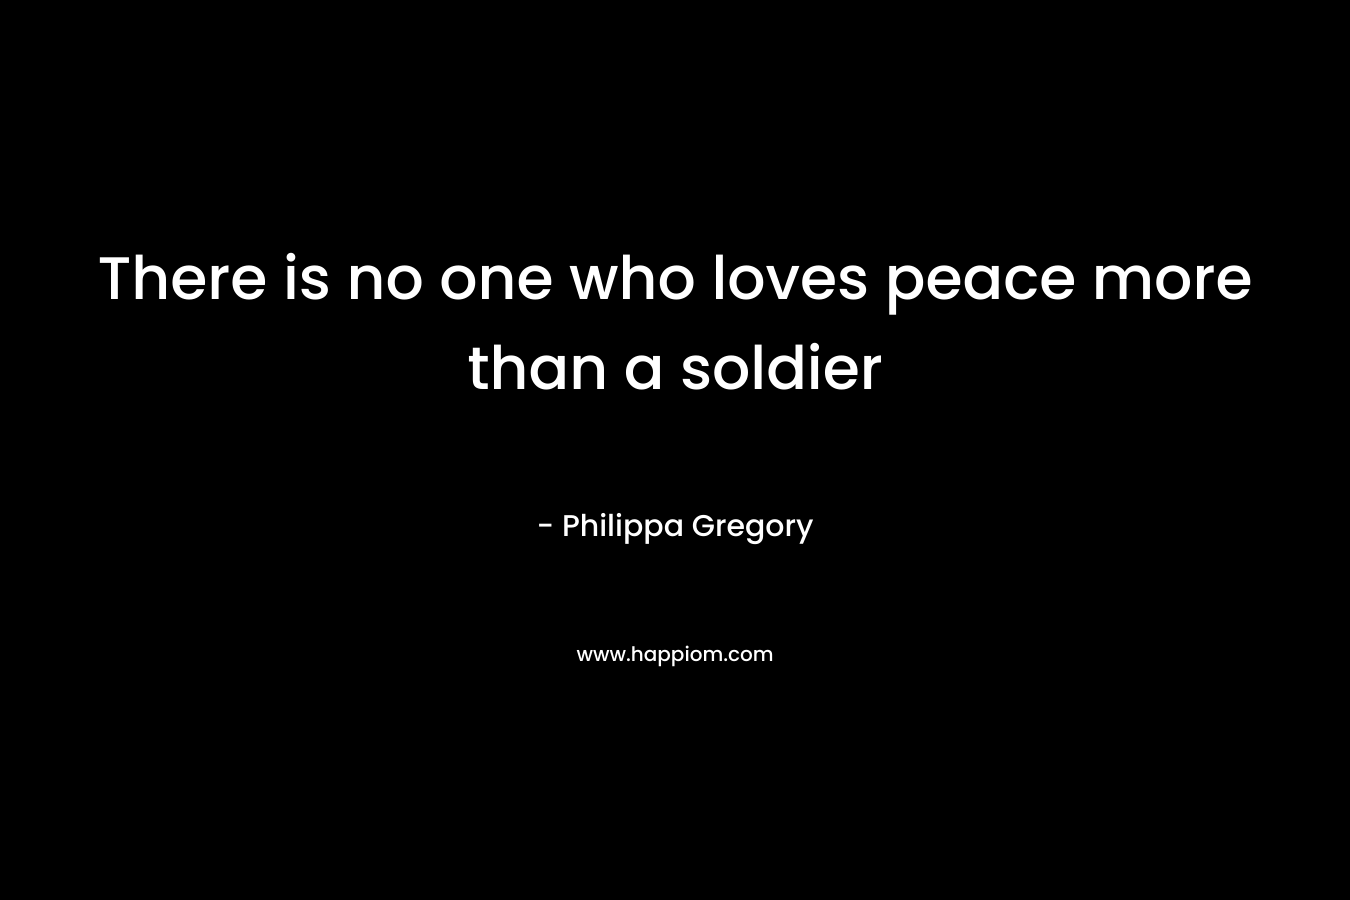 There is no one who loves peace more than a soldier